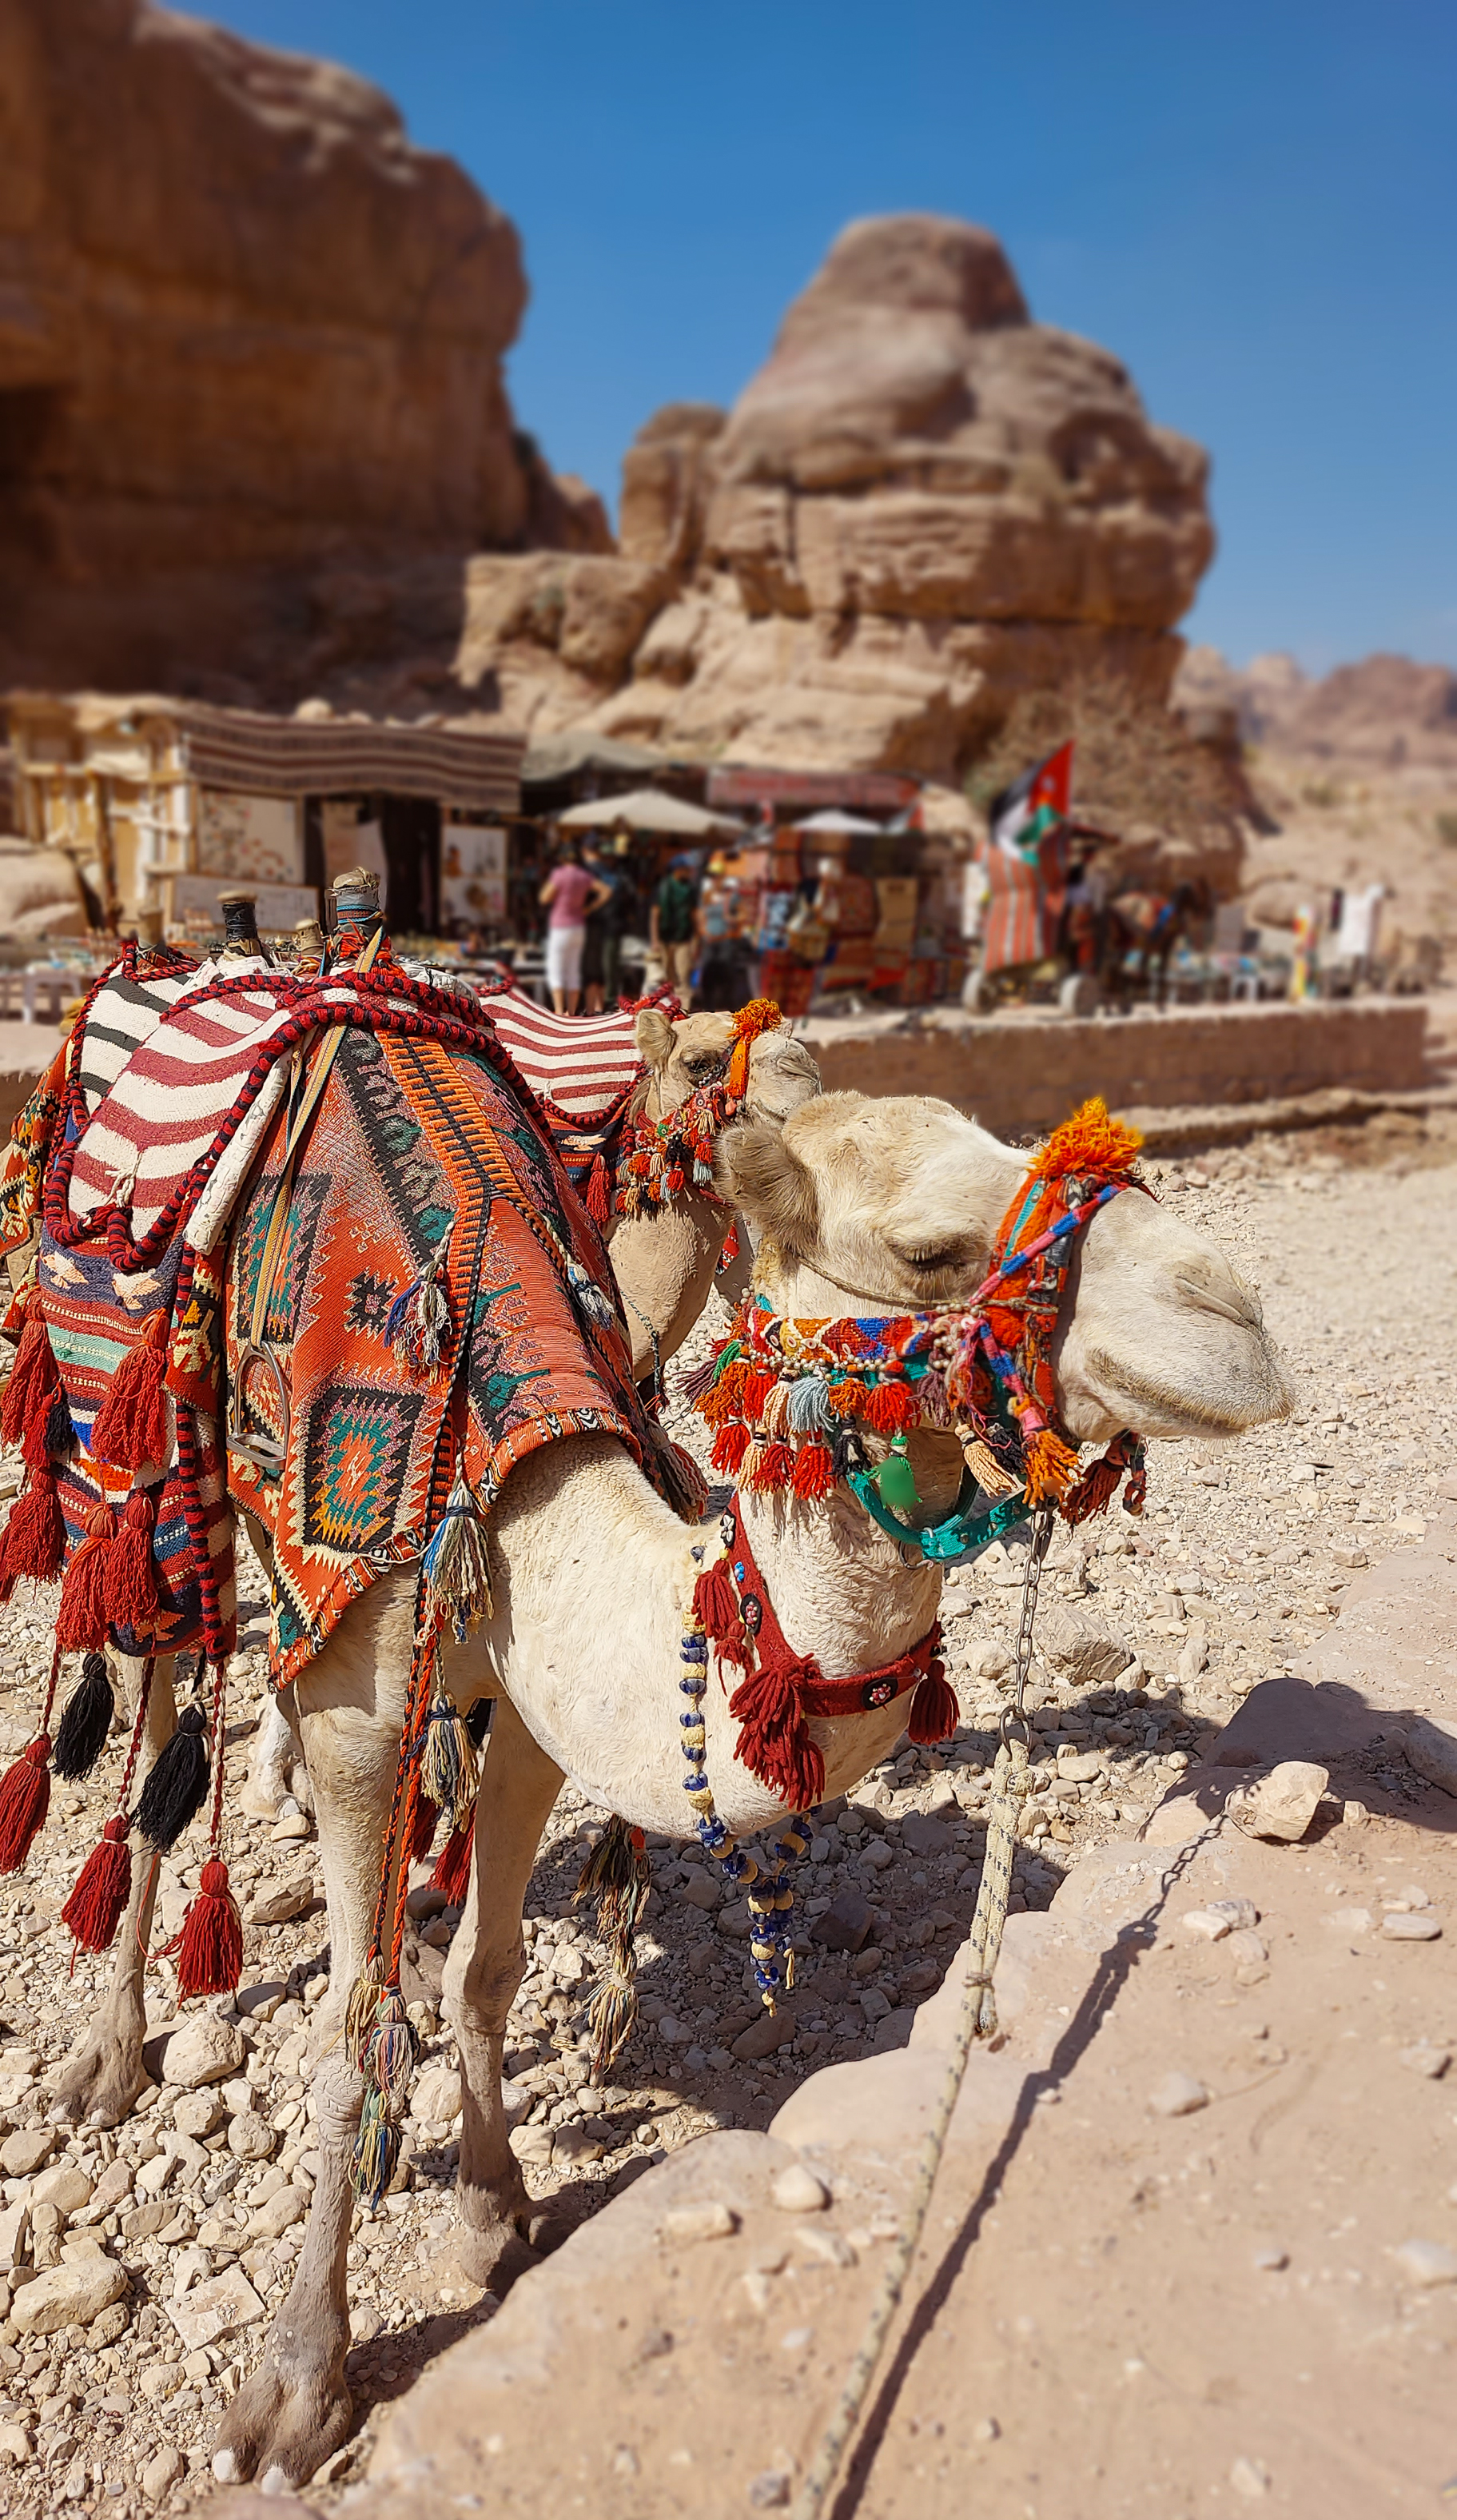 <span  class="uc_style_uc_tiles_grid_image_elementor_uc_items_attribute_title" style="color:#ffffff;">...and of course 'camels' (dromedaries) everywhere</span>